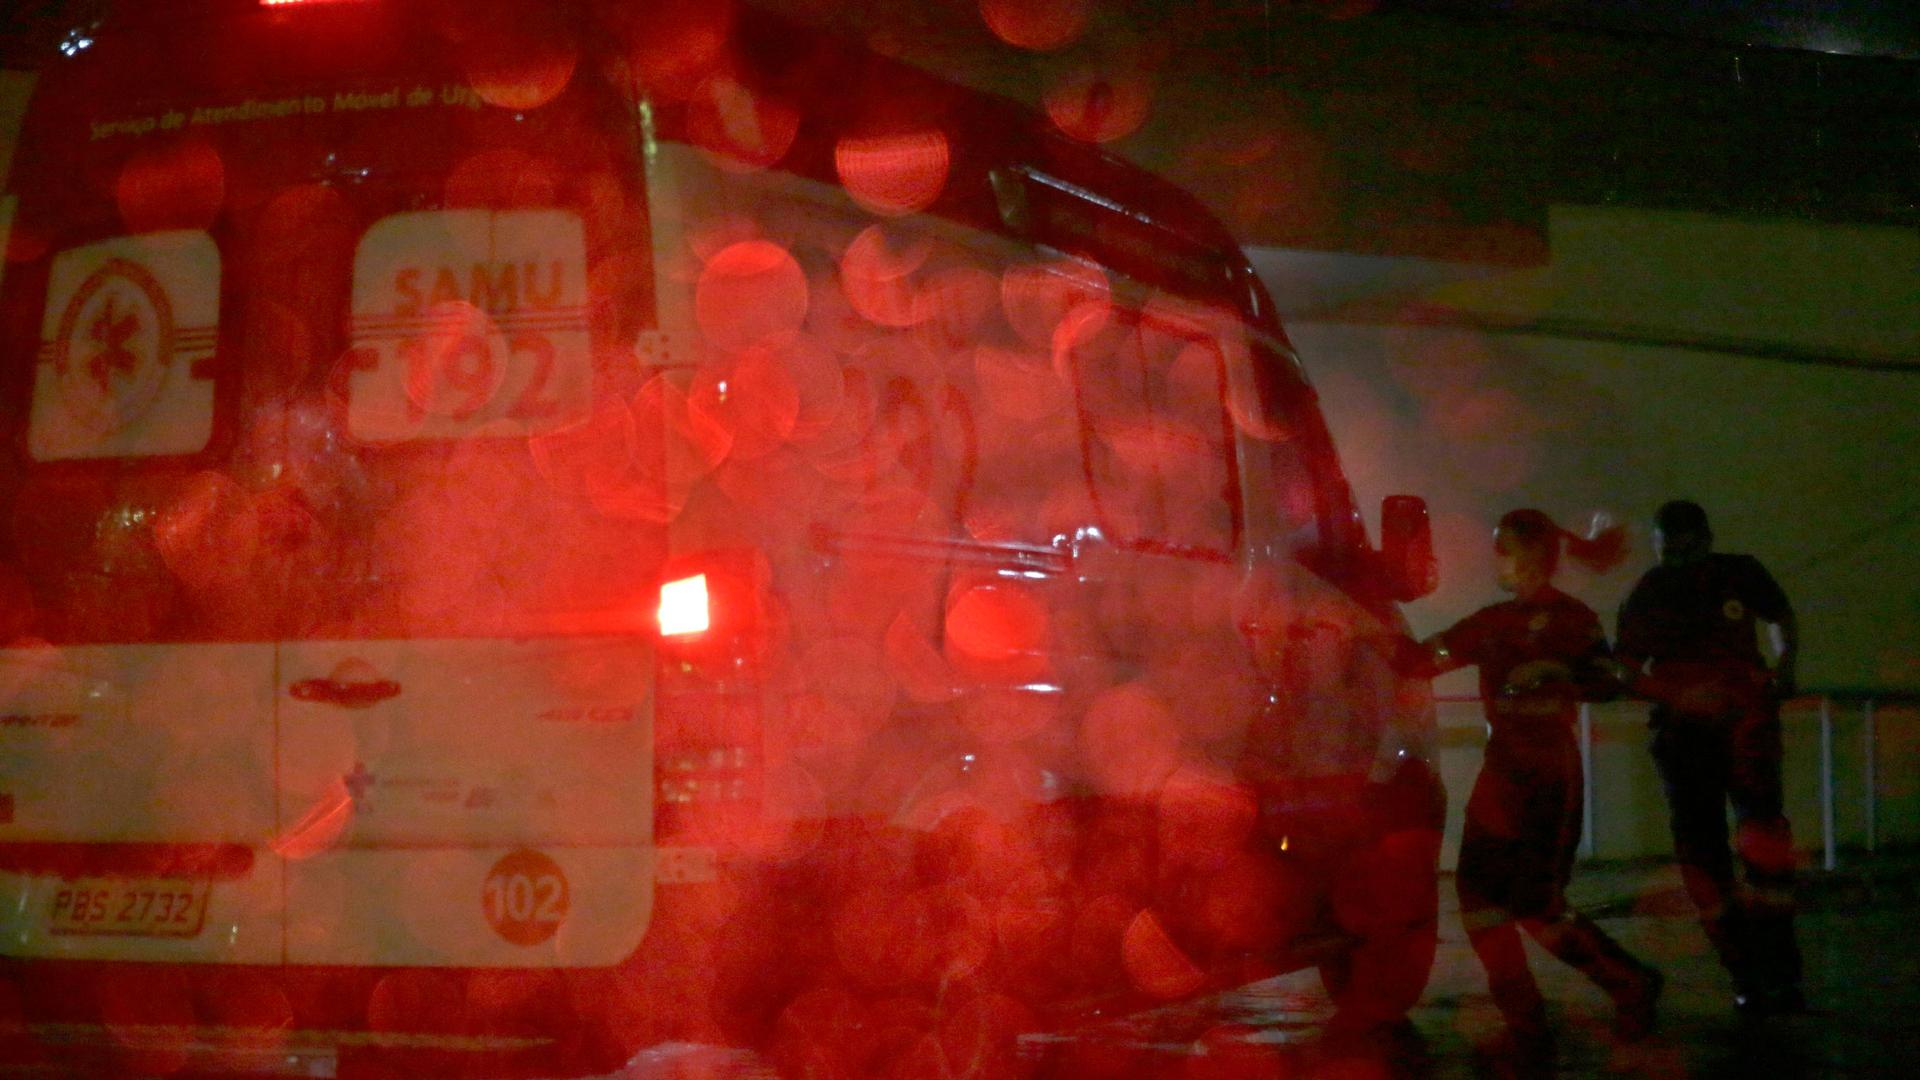 Two people are shown in shadow running toward an ambulance with red brake lights on in the rain.